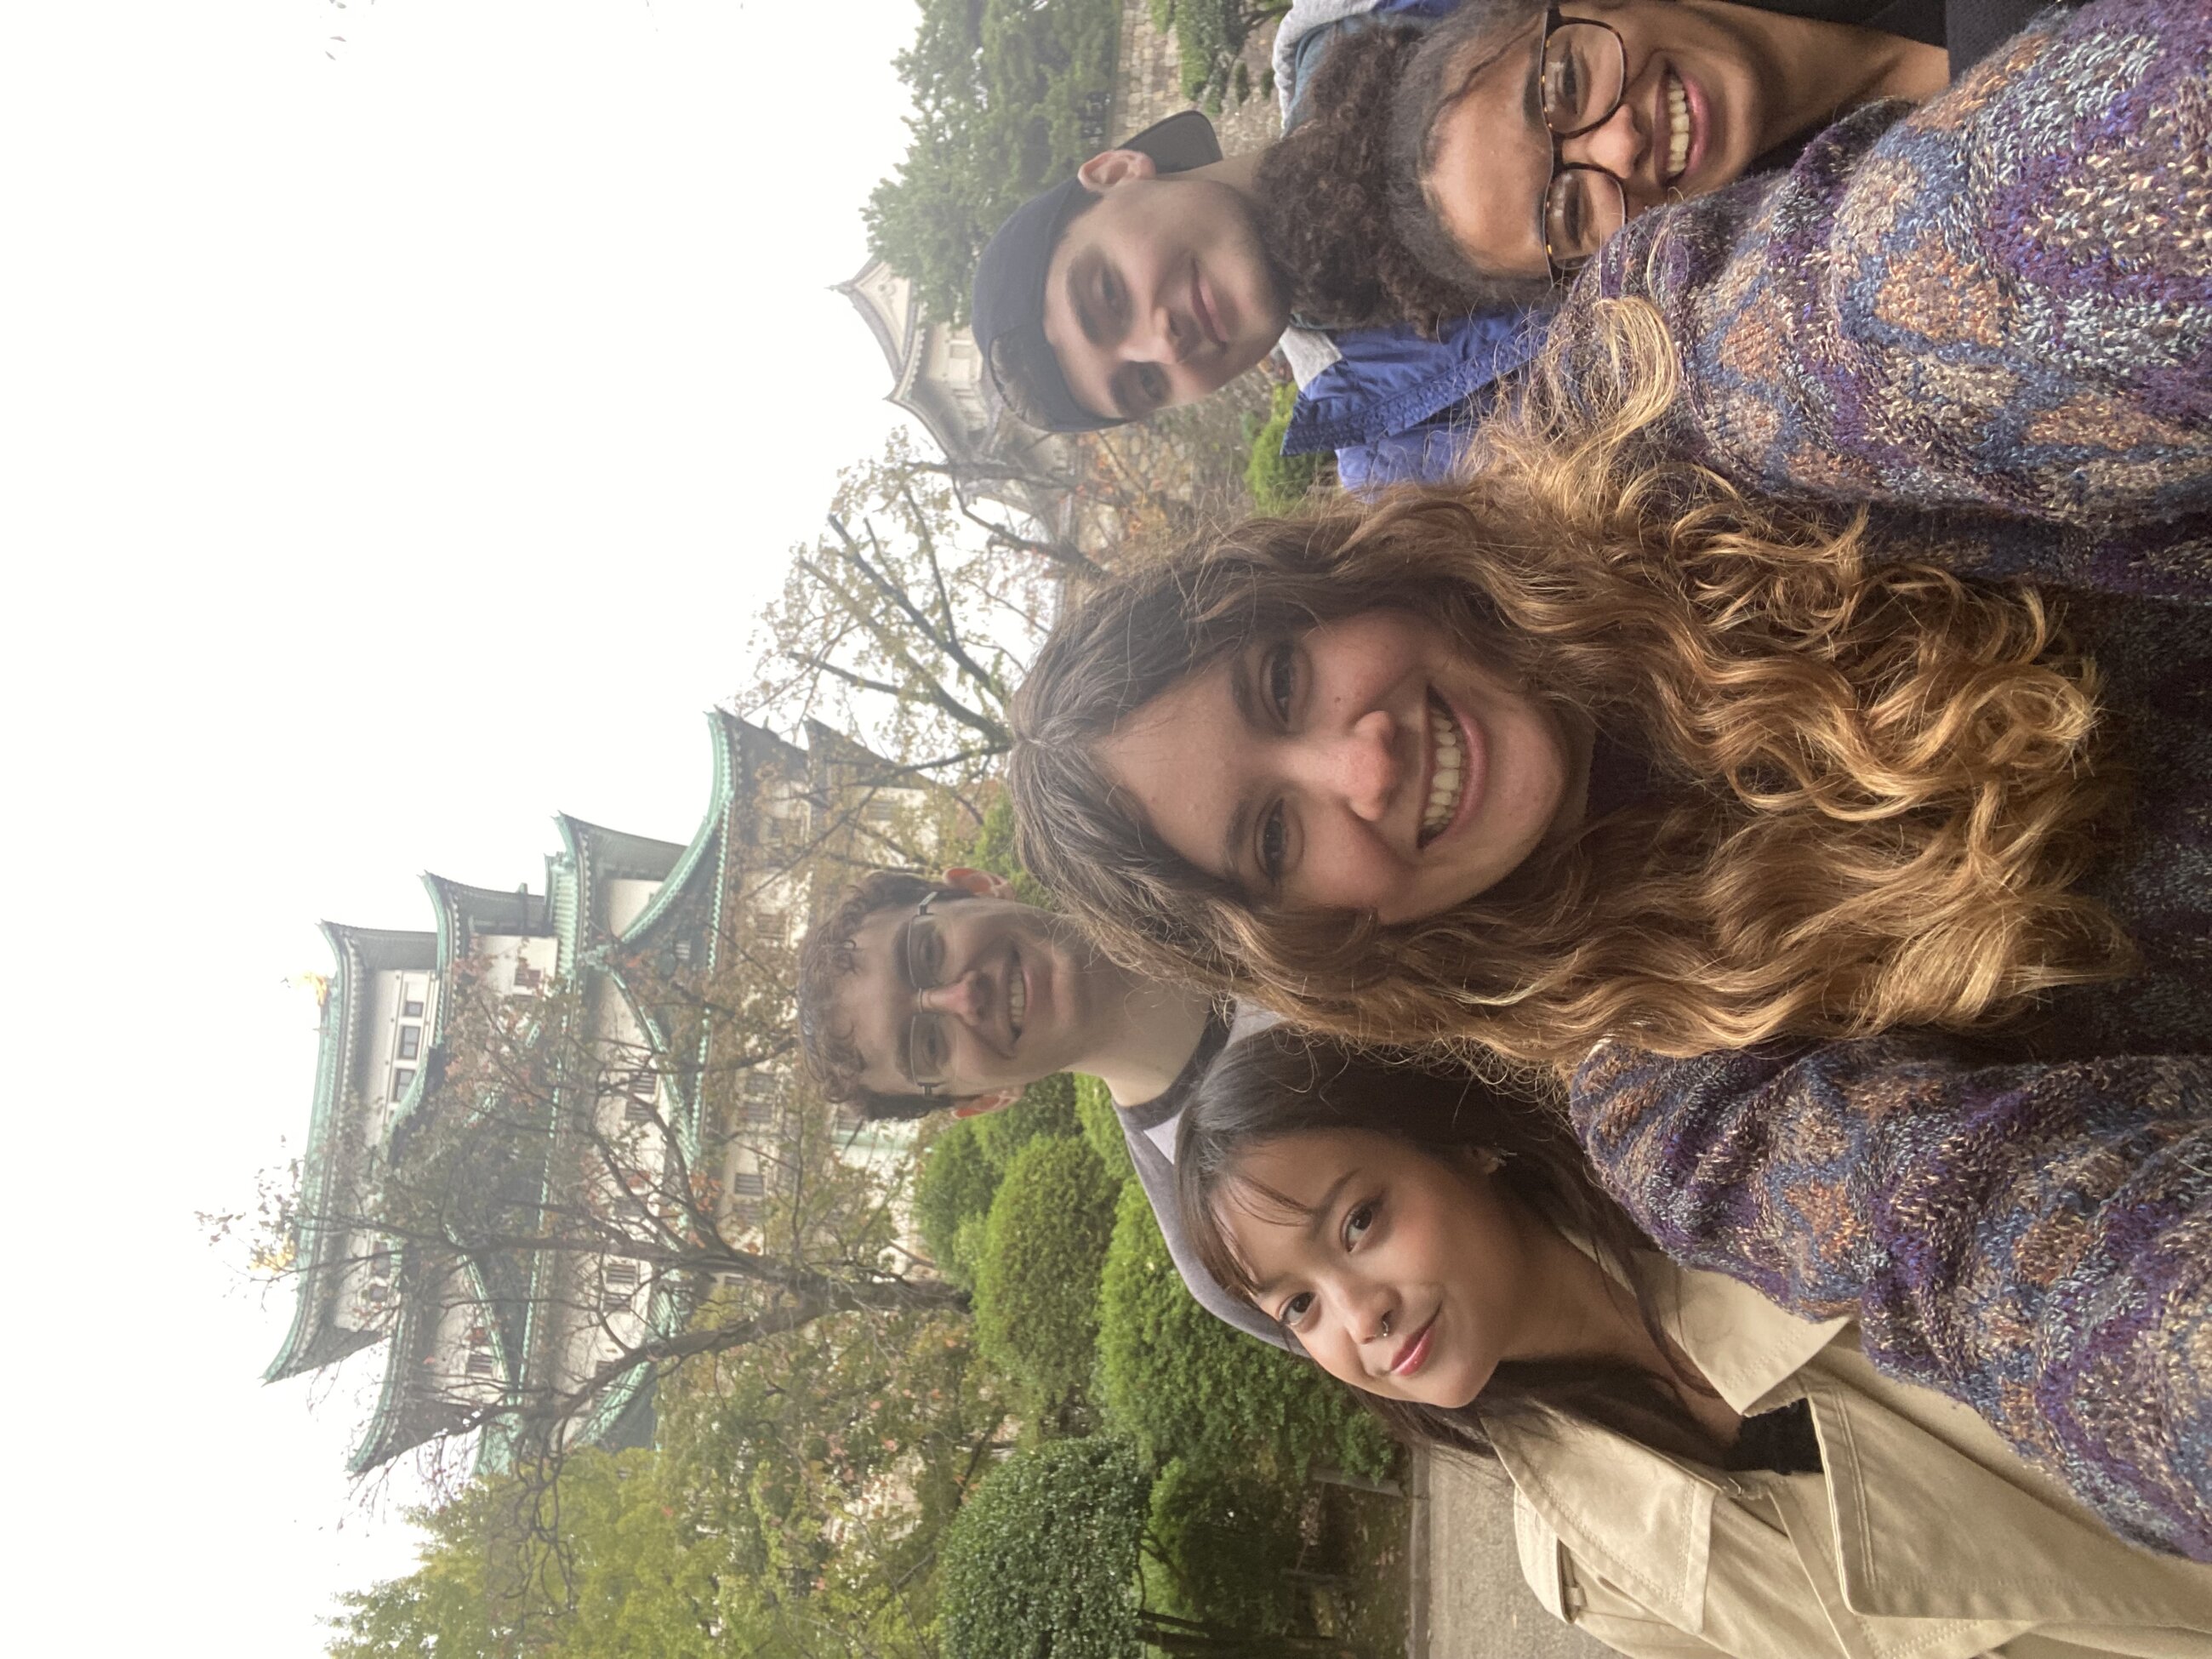 Some teachers and I at Nagoya Castle during training  